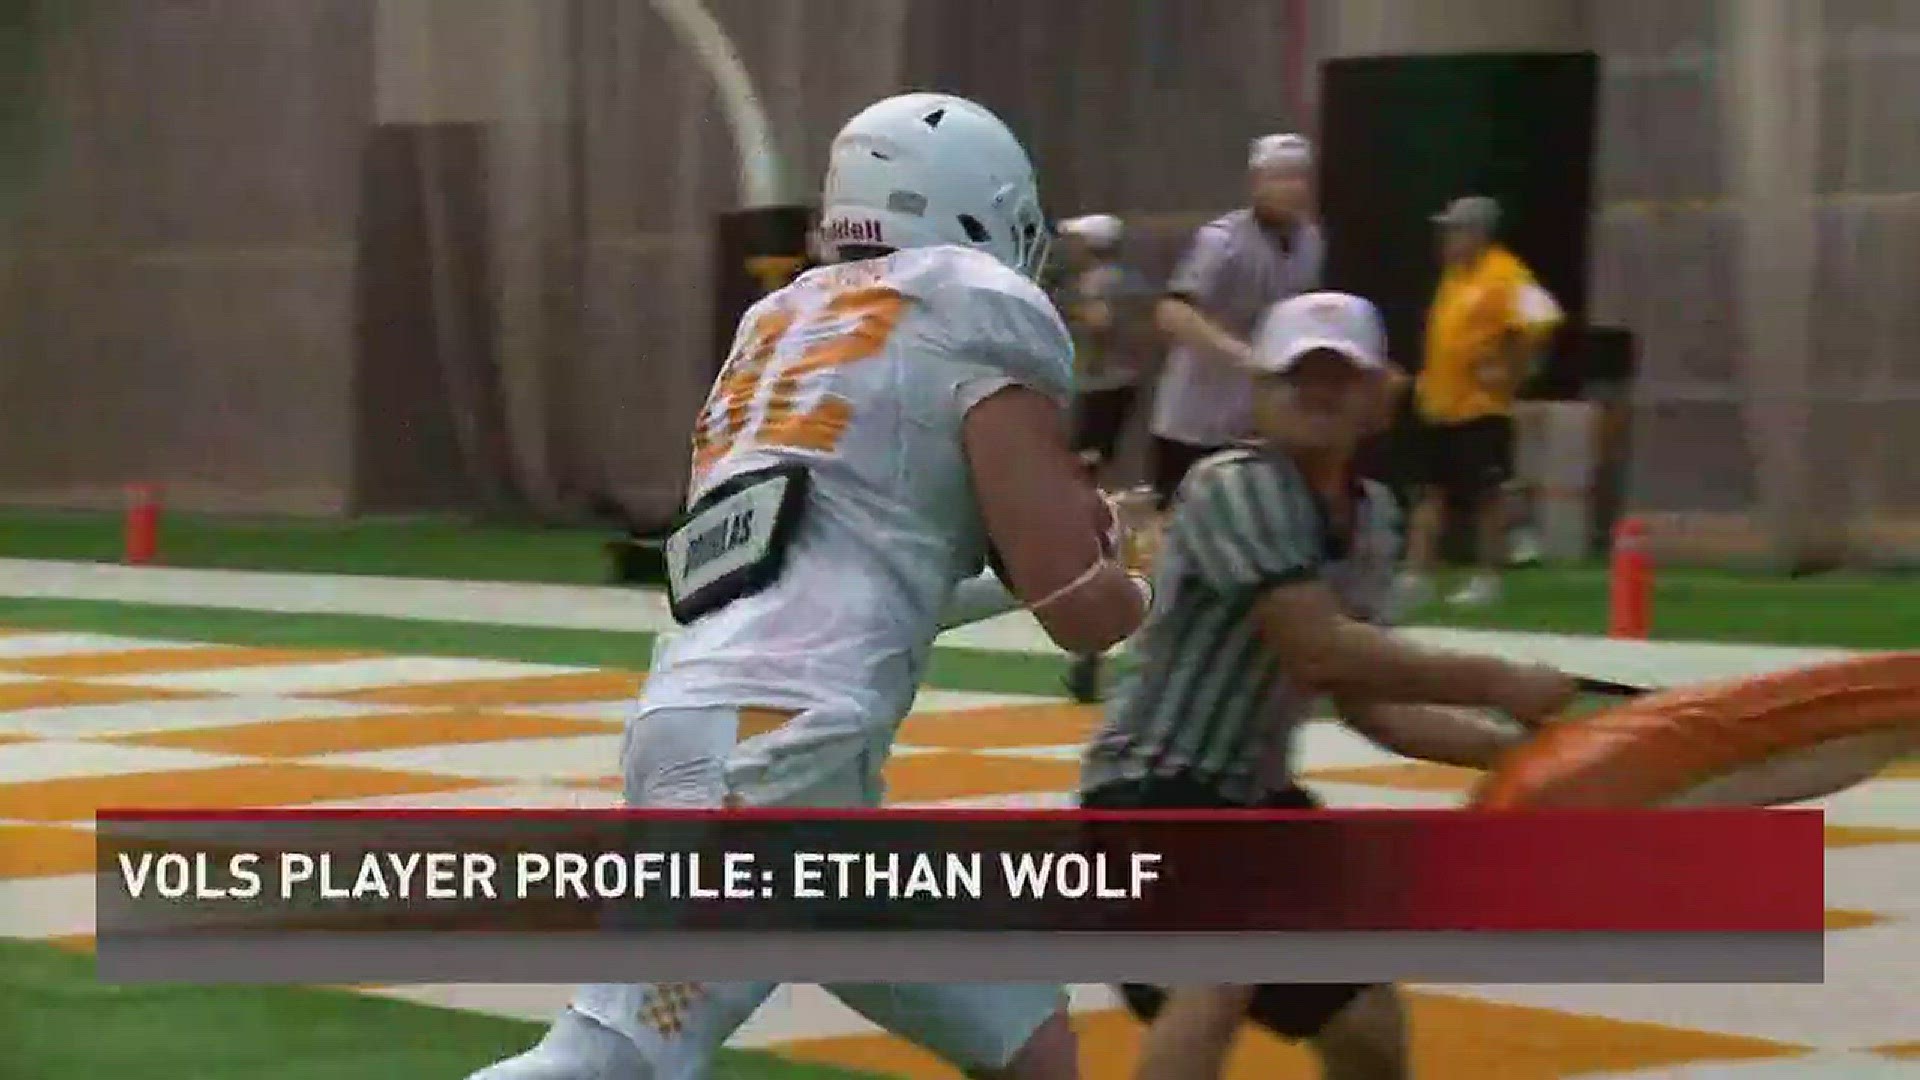 Vols player profile: Ethan Wolf